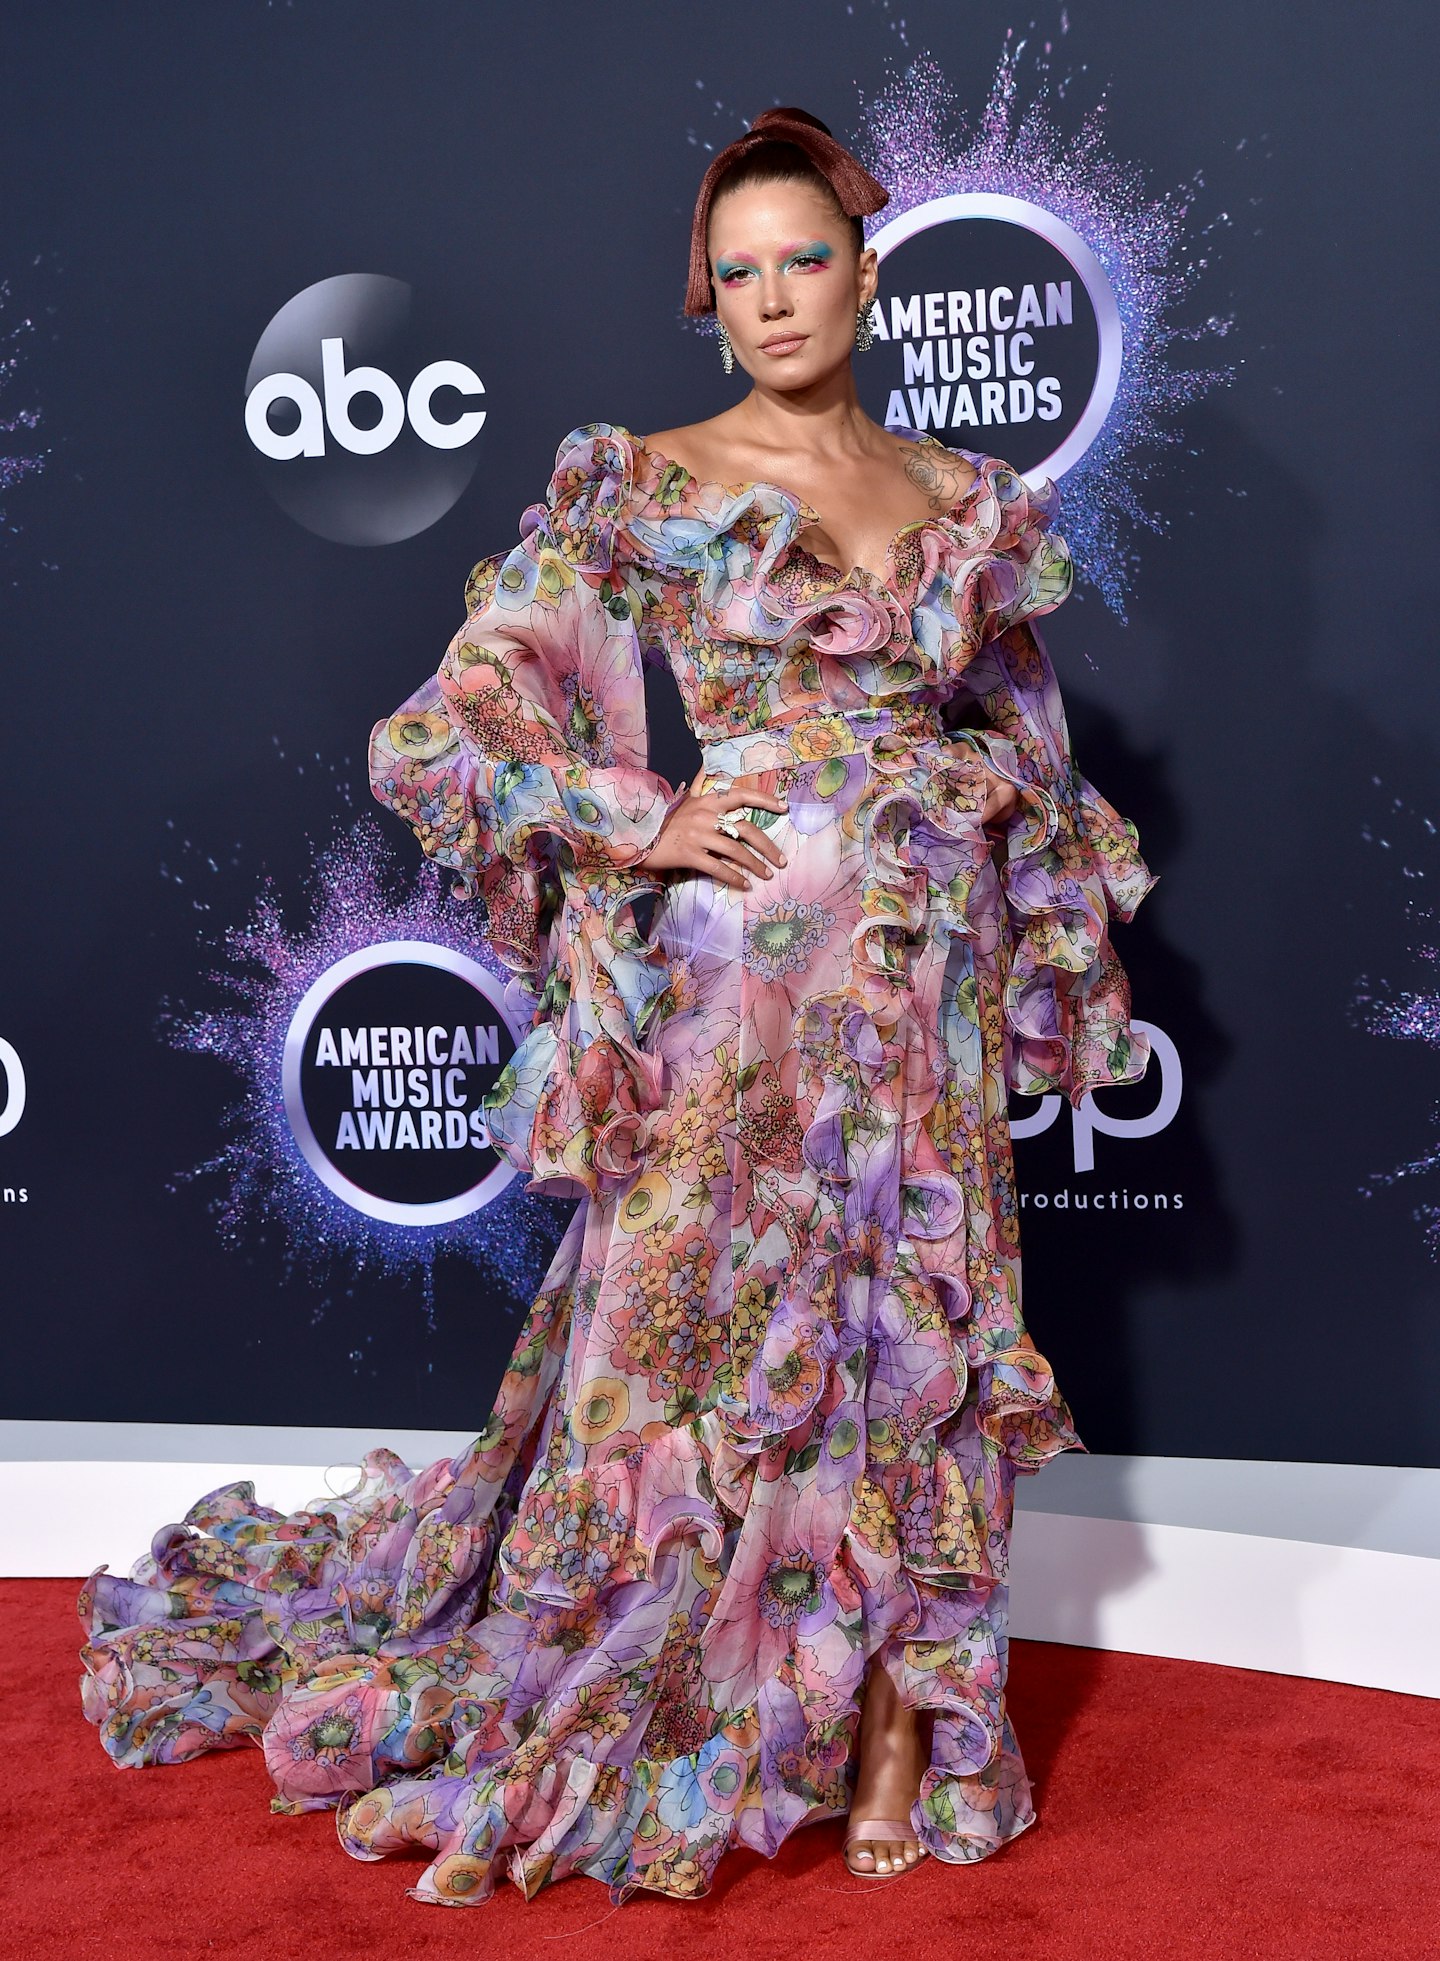 The Best Looks At The American Music Awards